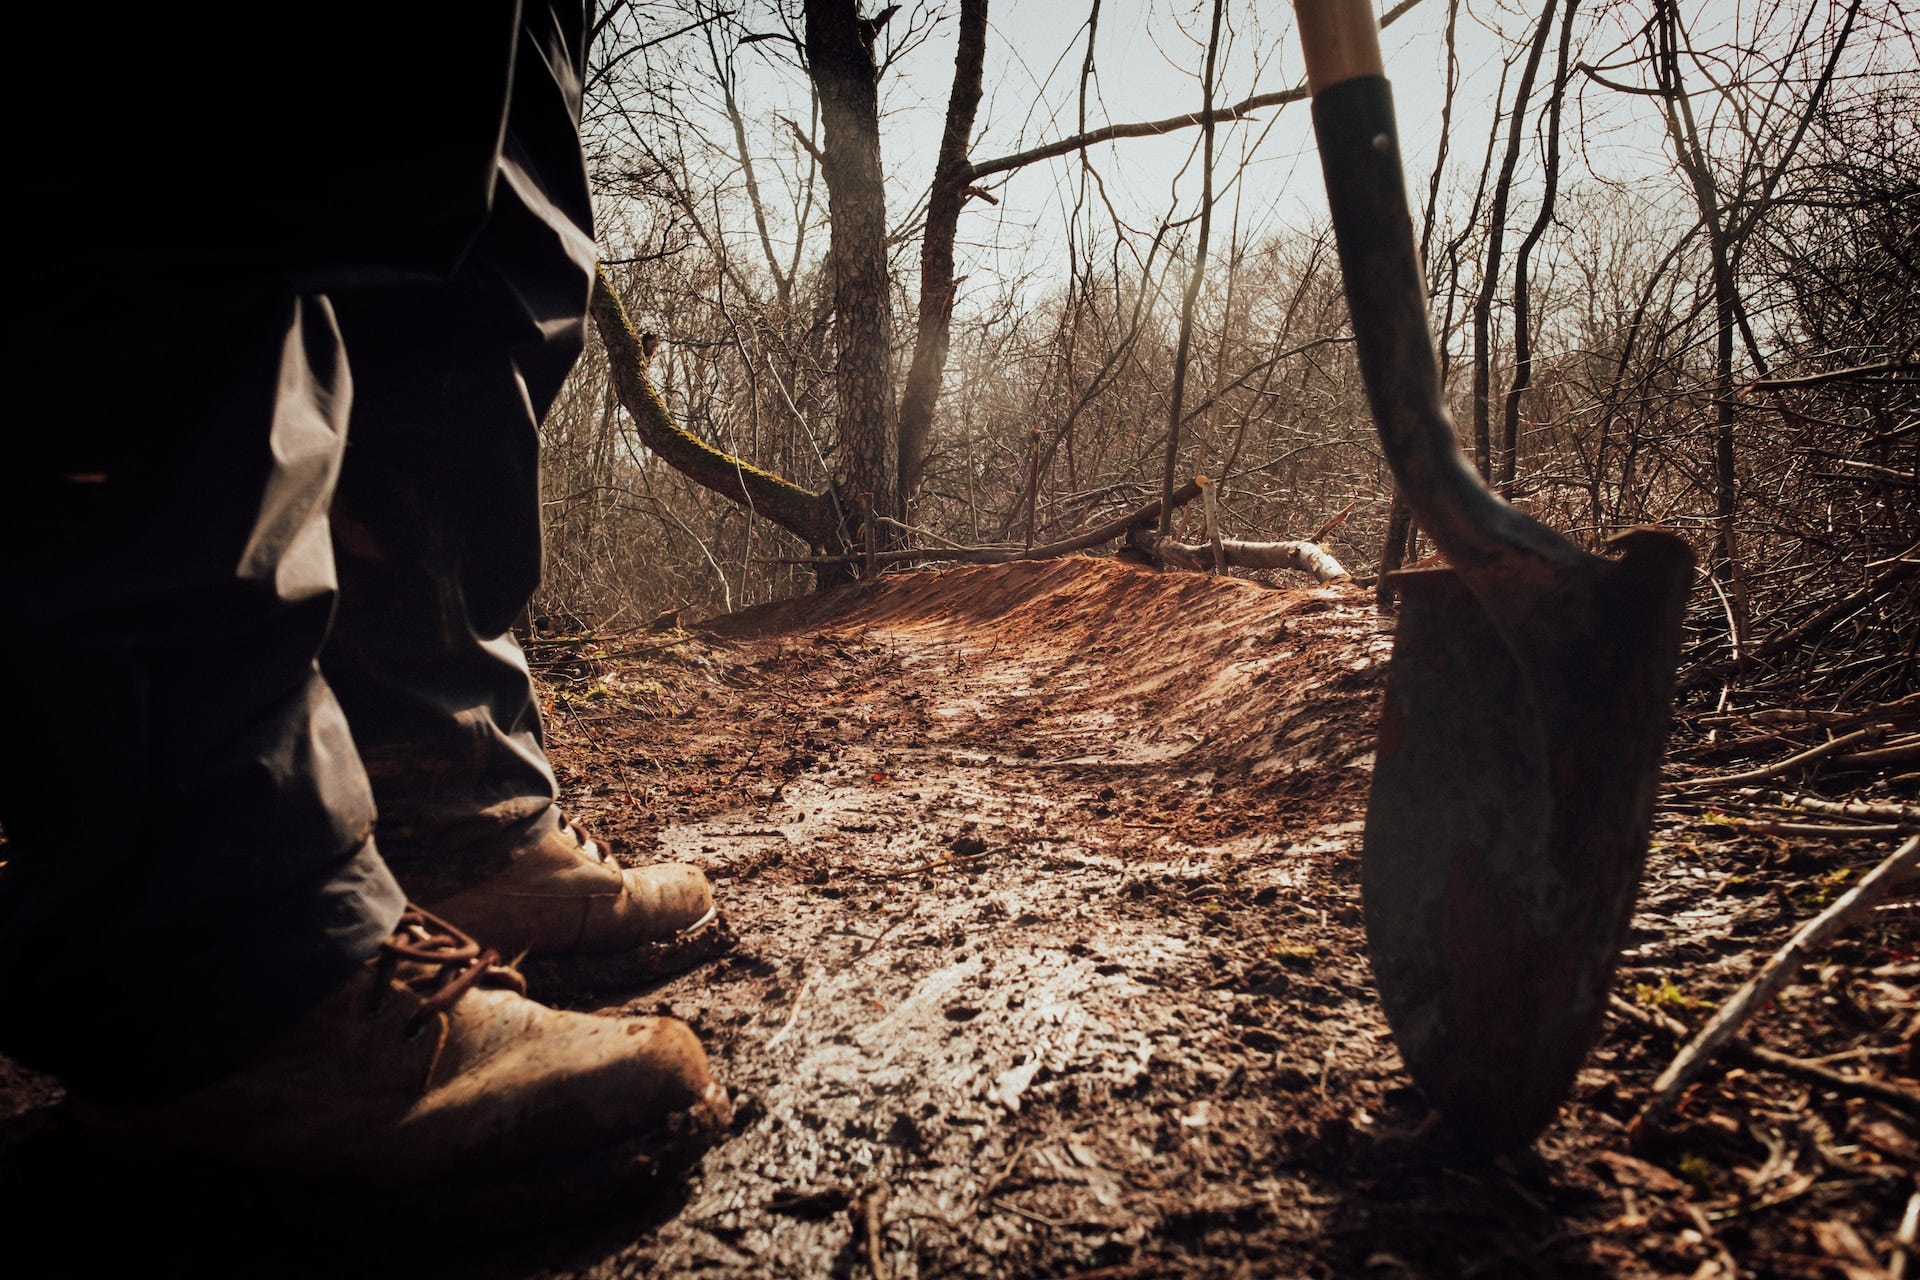 A pair of feet in boots and the tip of a shovel on wooded ground.